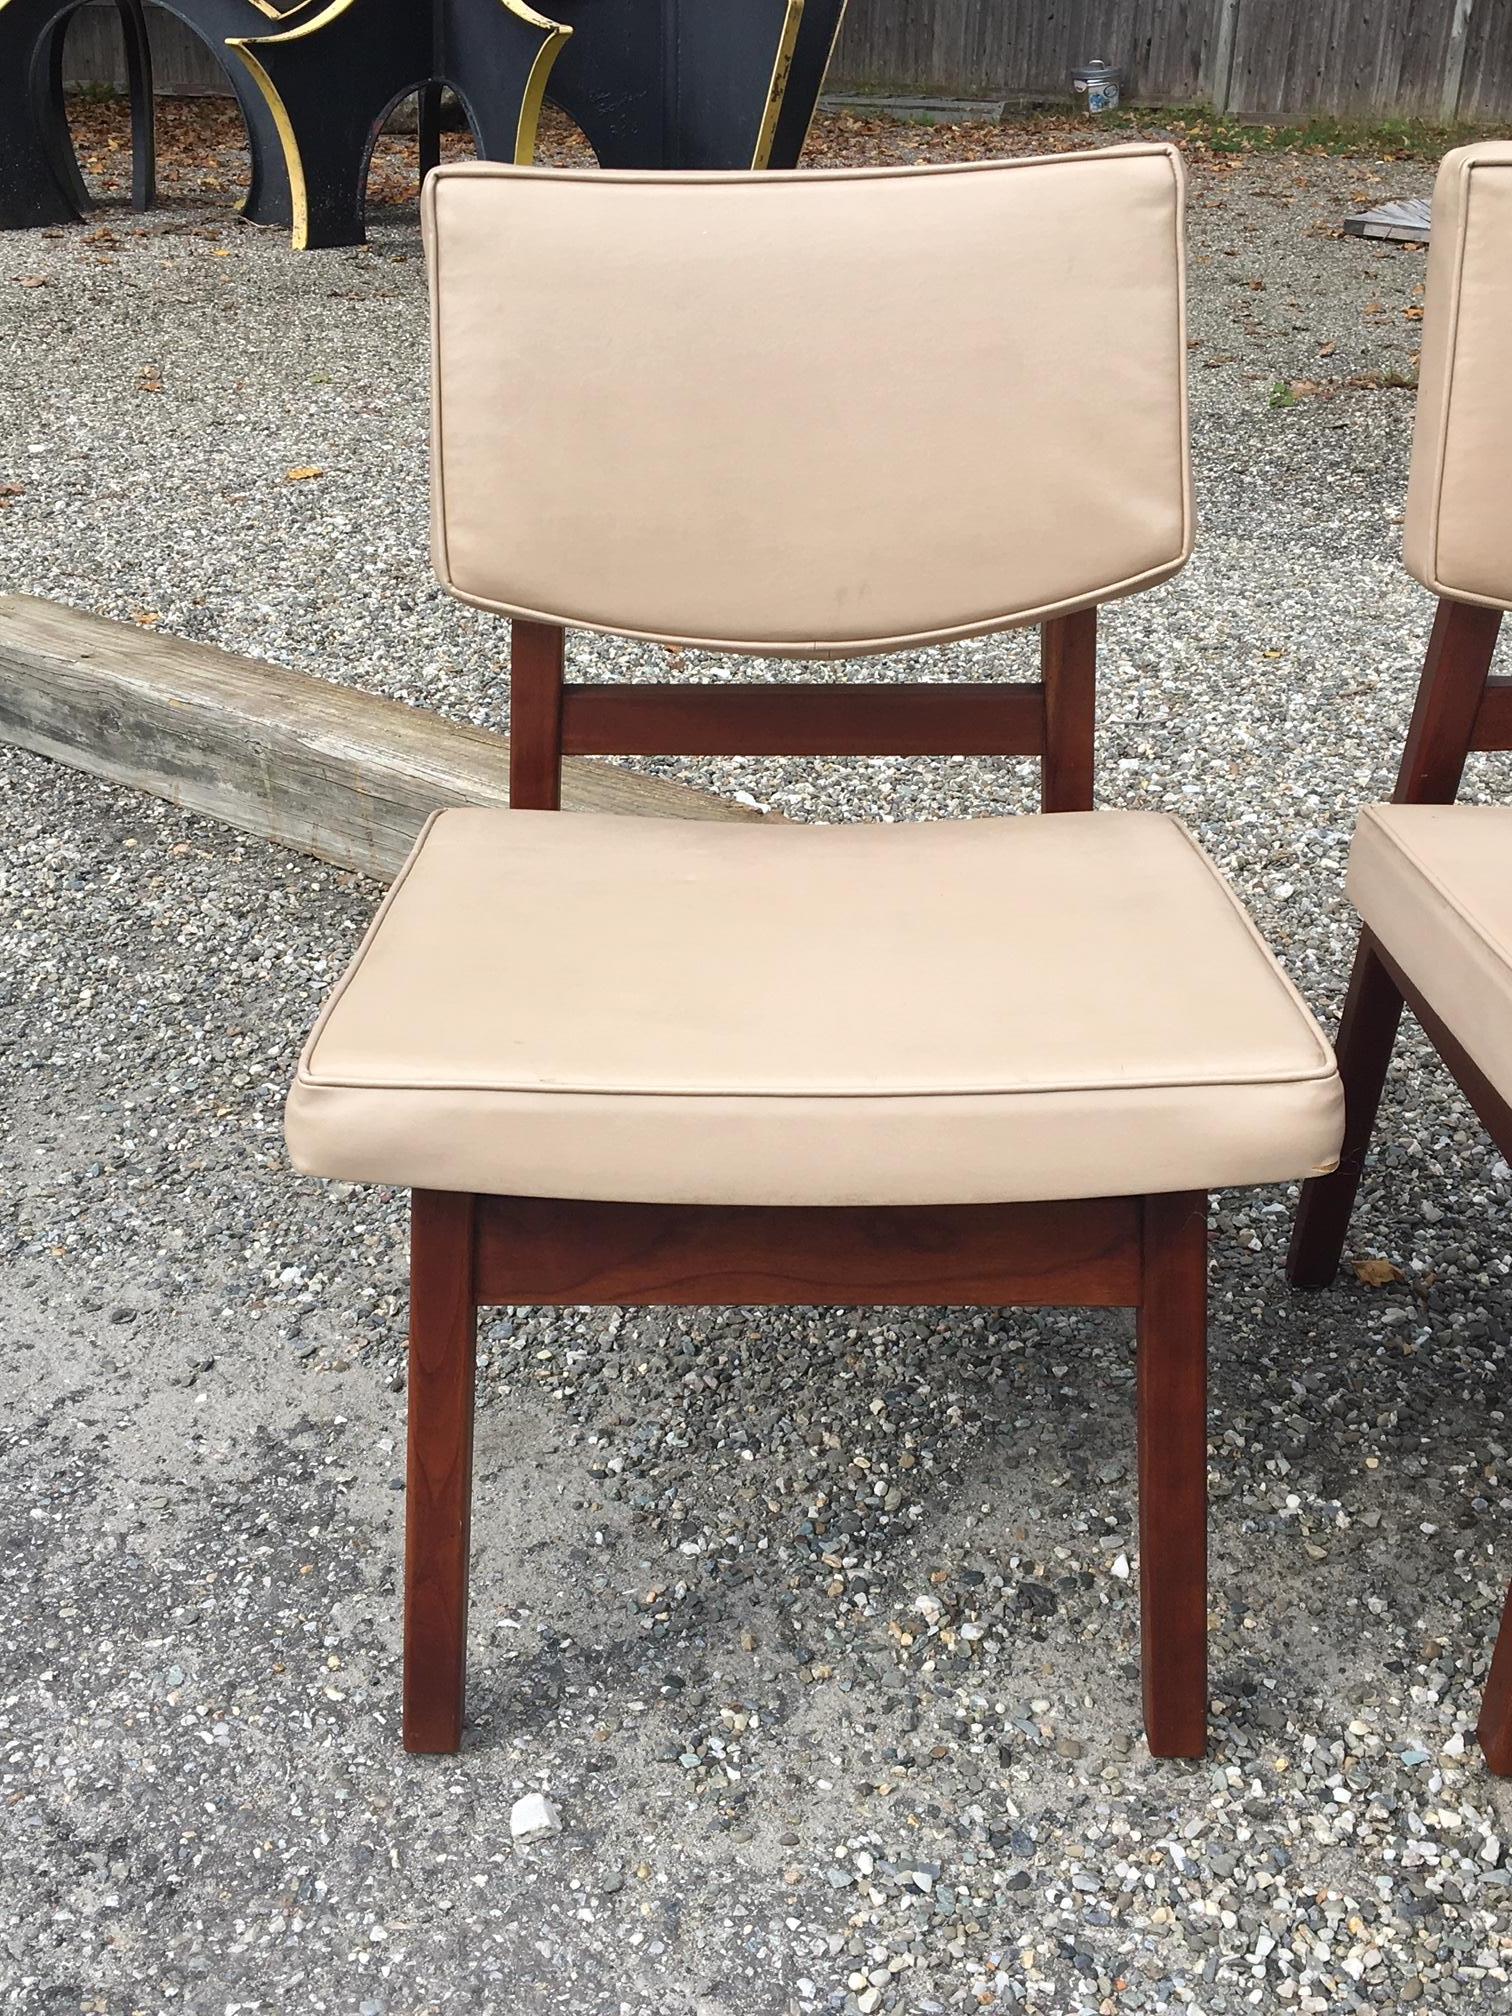 Mid-Century Modern Set of 8 Original Jens Risom Walnut Dining Chairs in Original Leather Upholstery